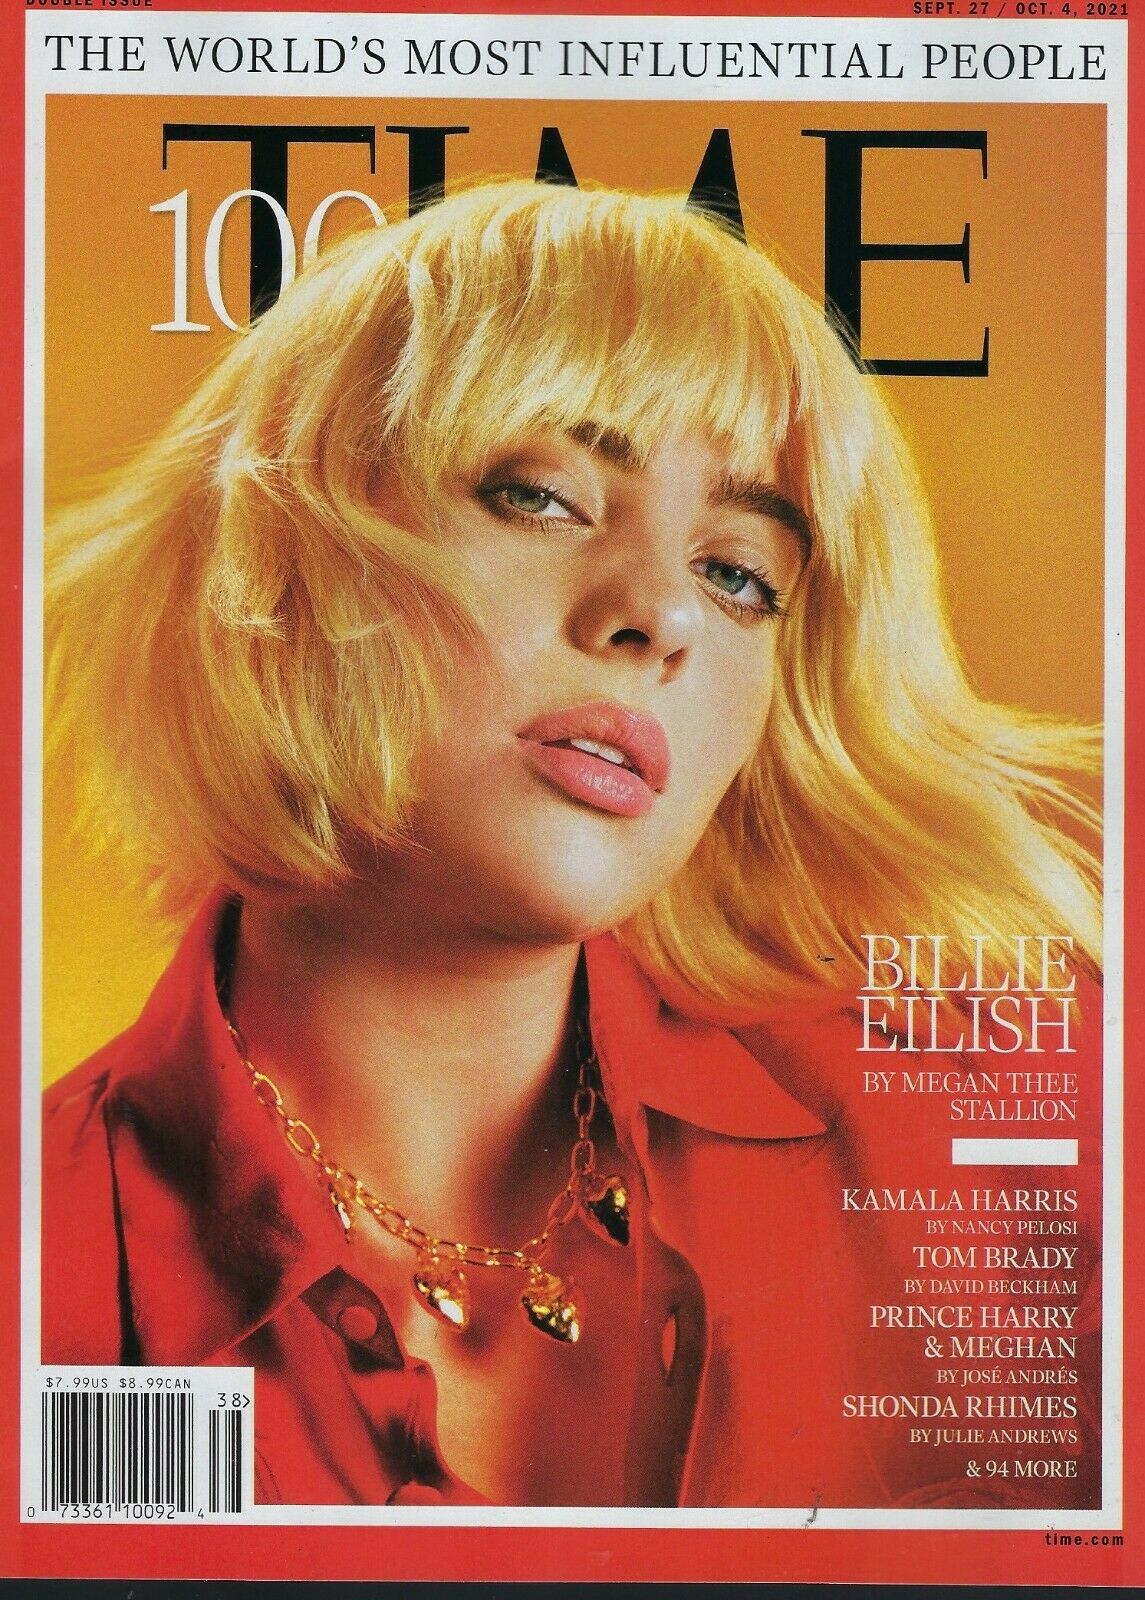 Time Magazine September 27th 2021 The World's Most Influential People Billie Eilish